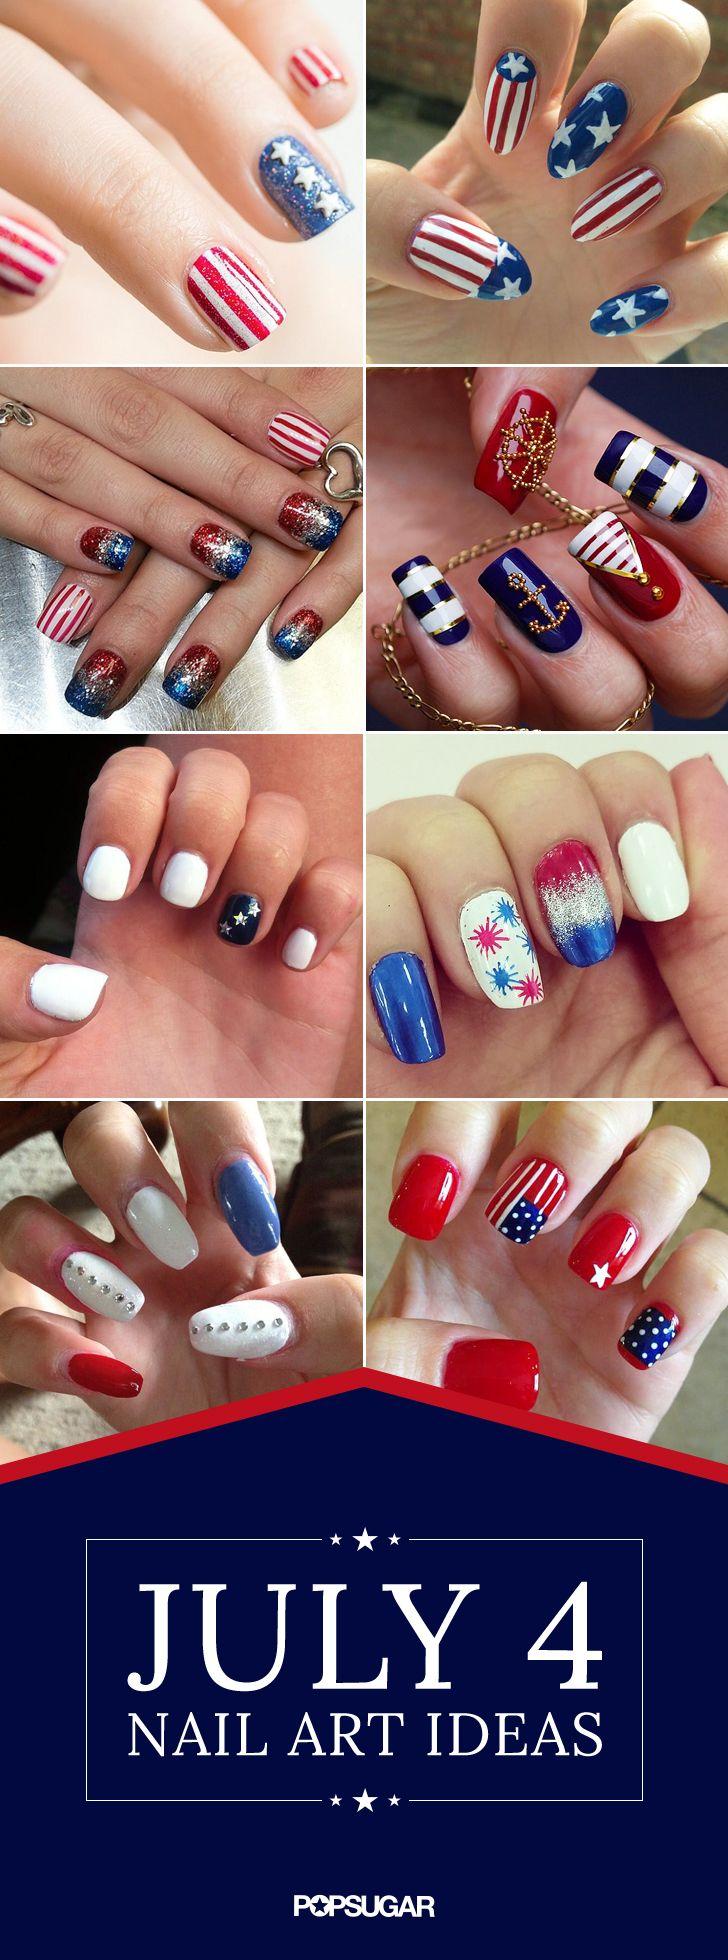 Свадьба - Even More Inspiration For Your July 4 Nail Art